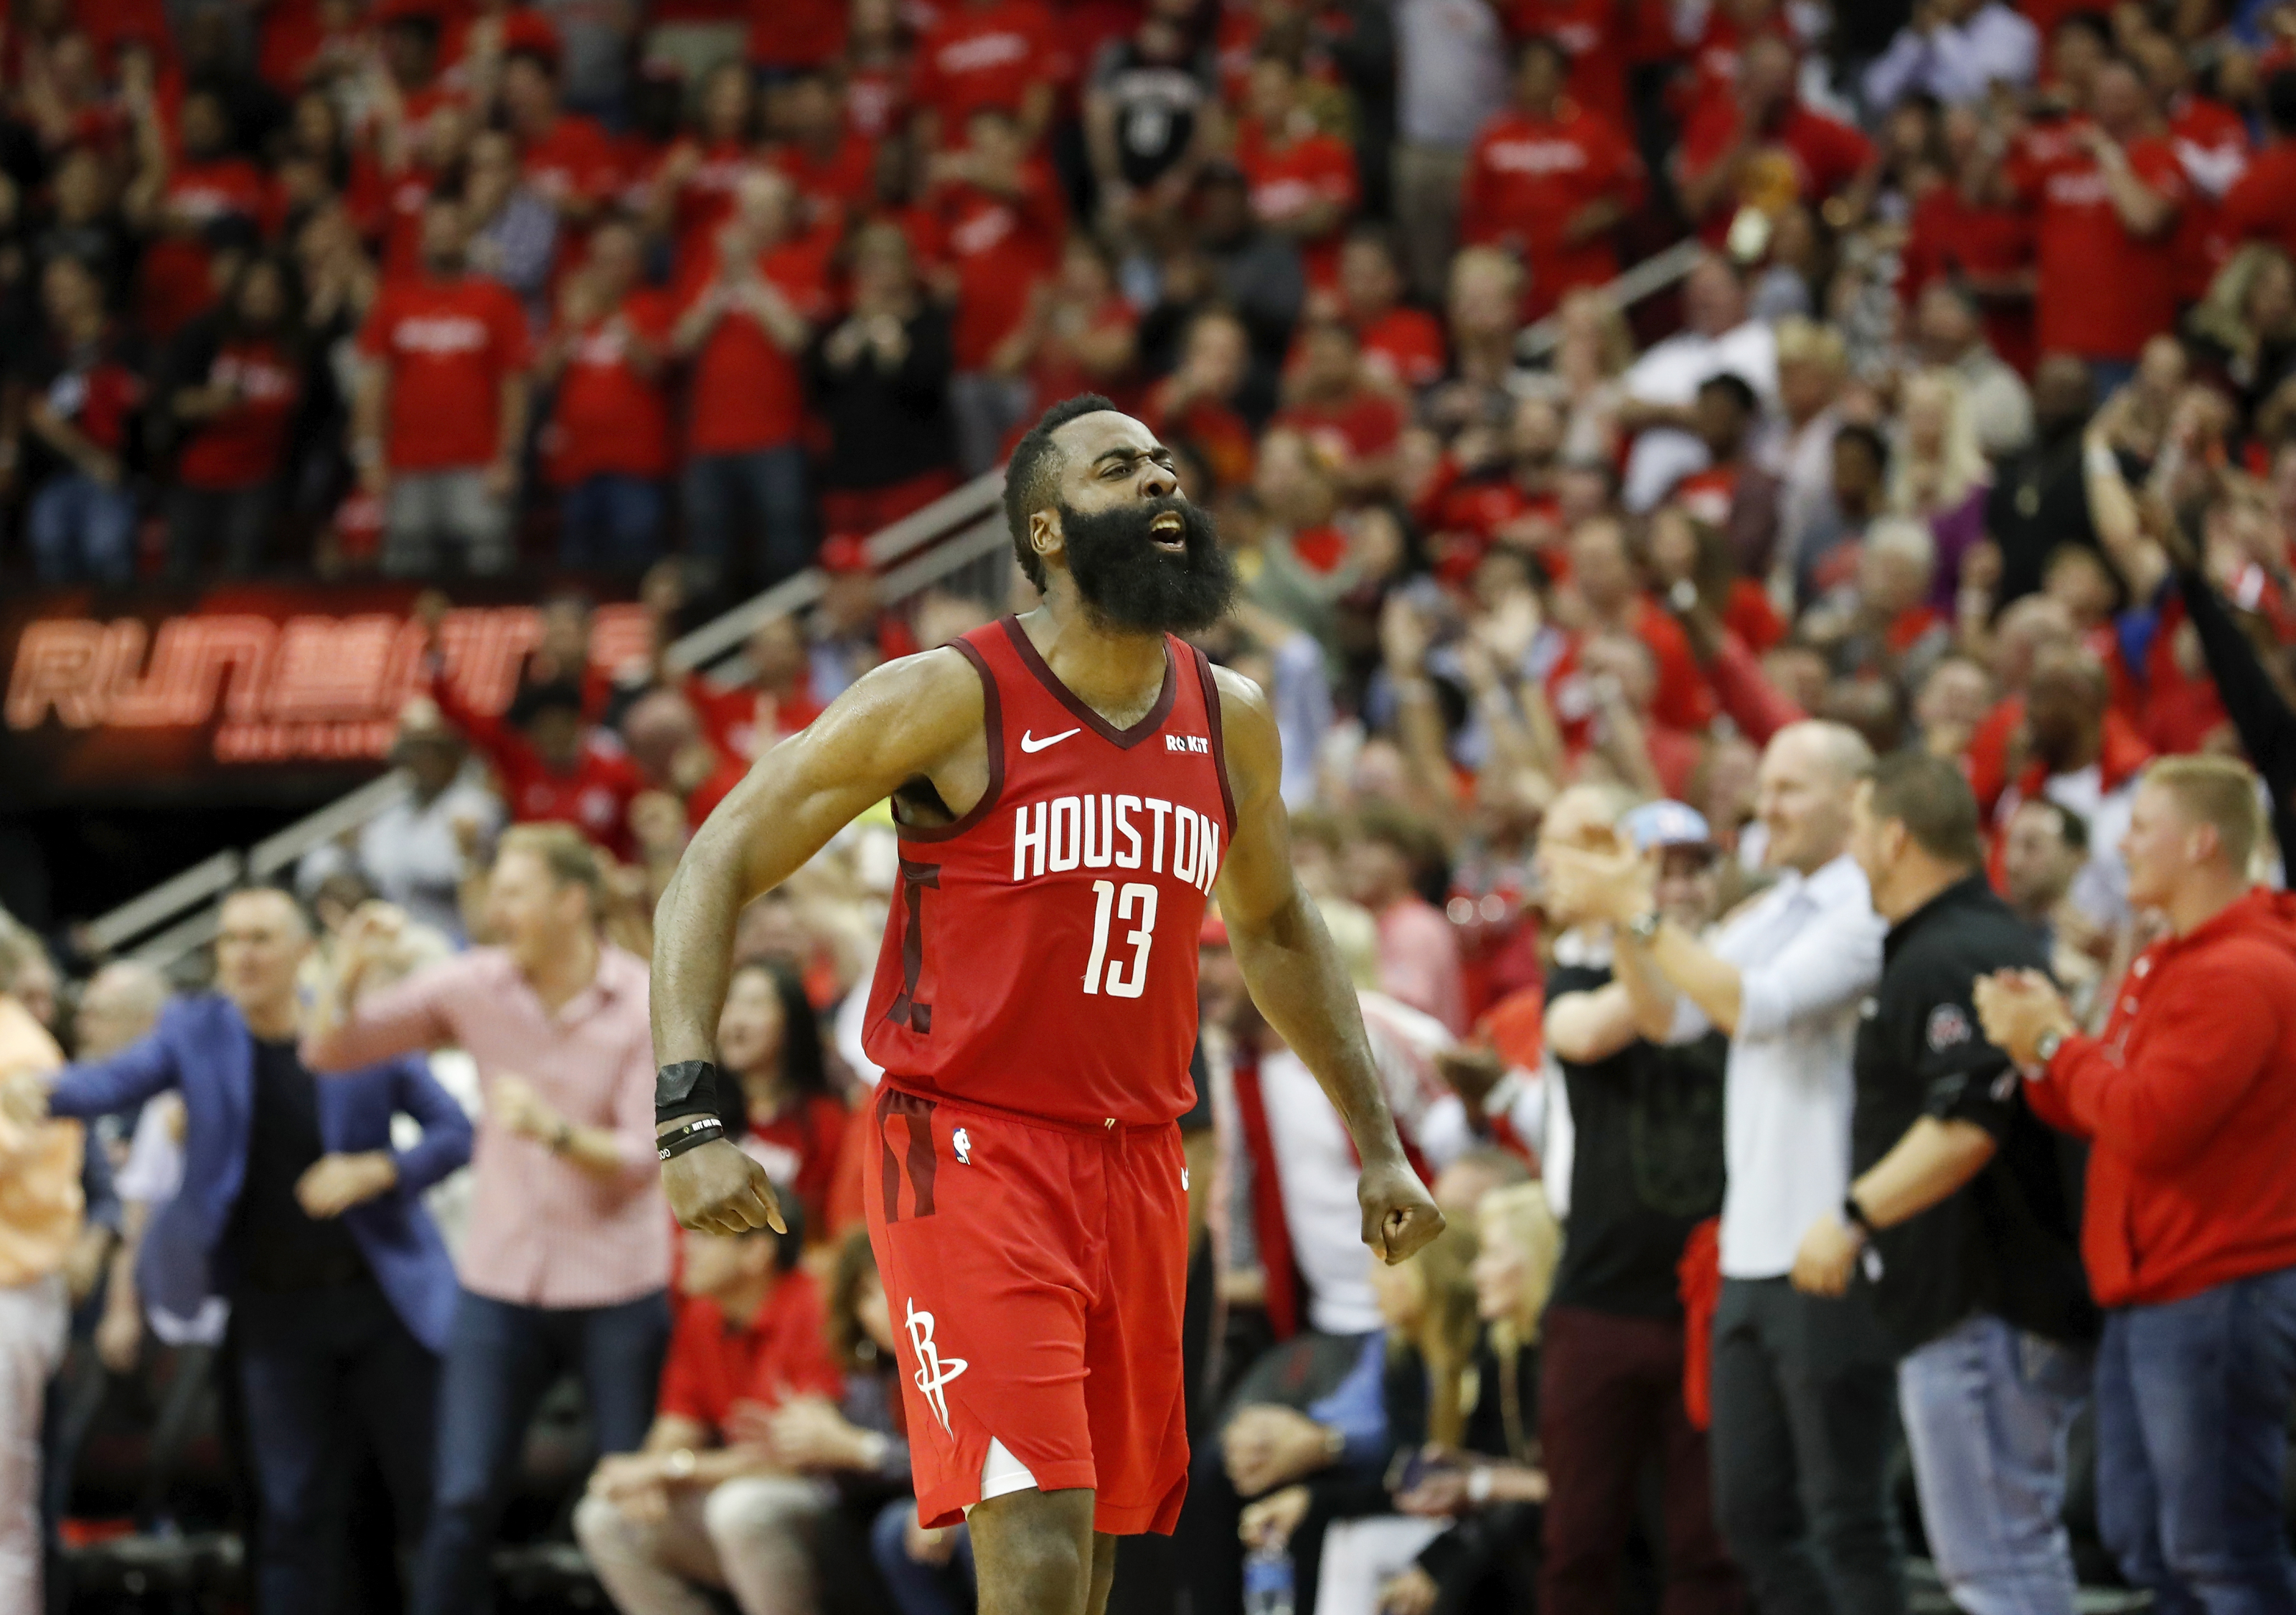 2018-19 Rockets review: James Harden